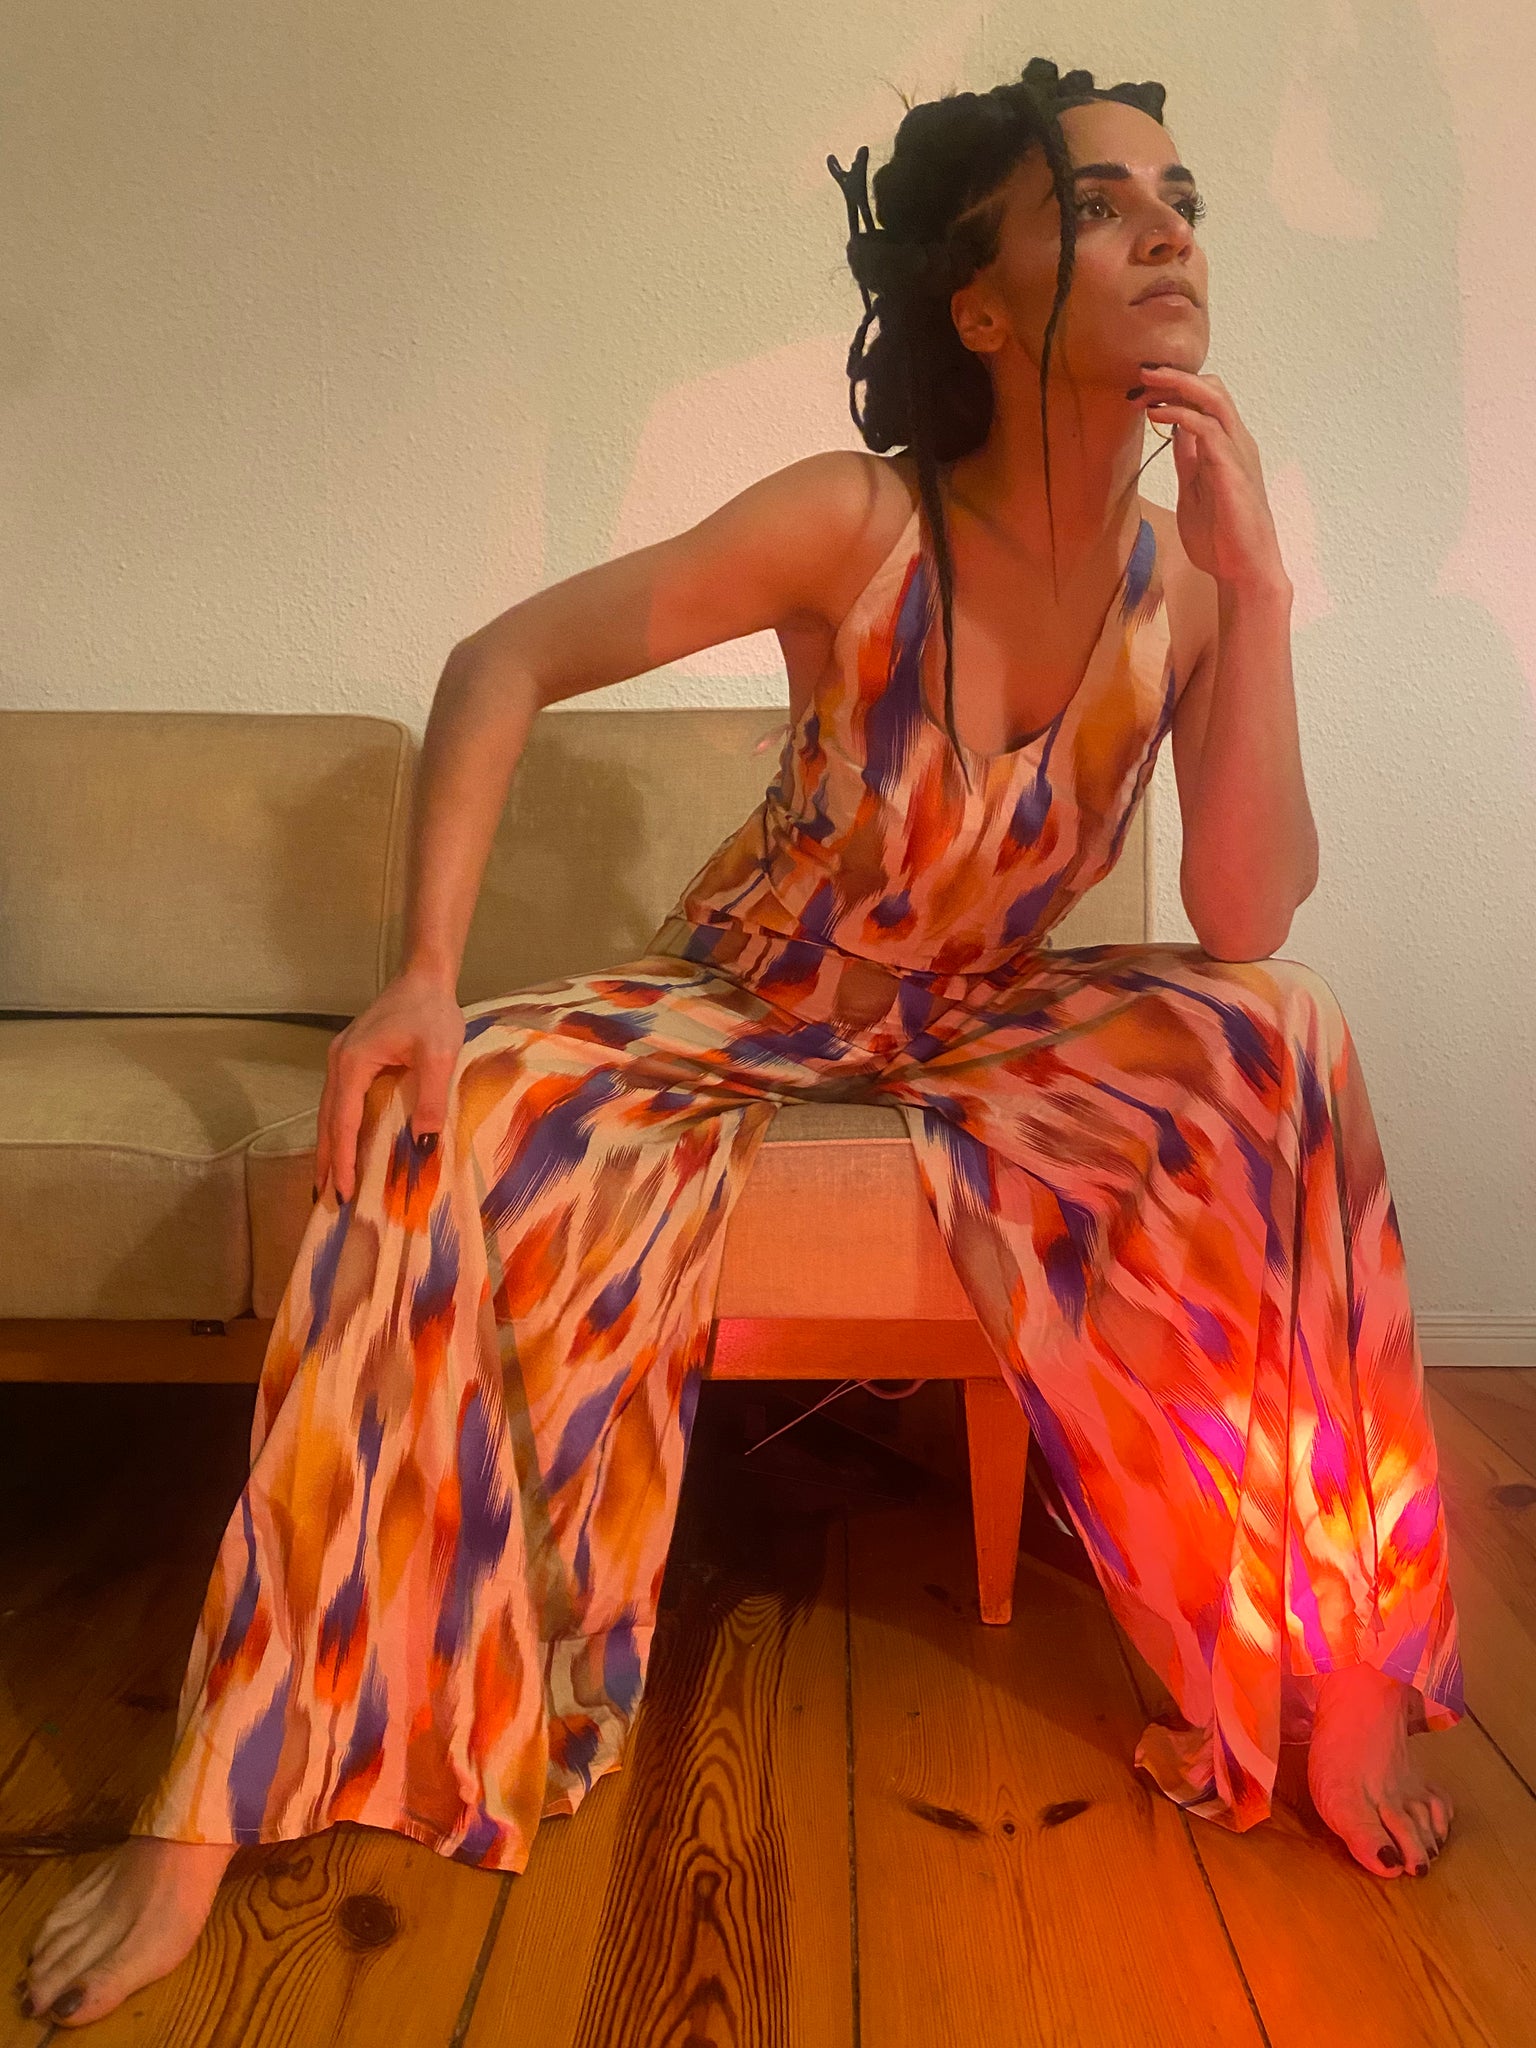 A woman leans over on a yellow couch, her colourful clothes matching the couch and the red light shining on her.